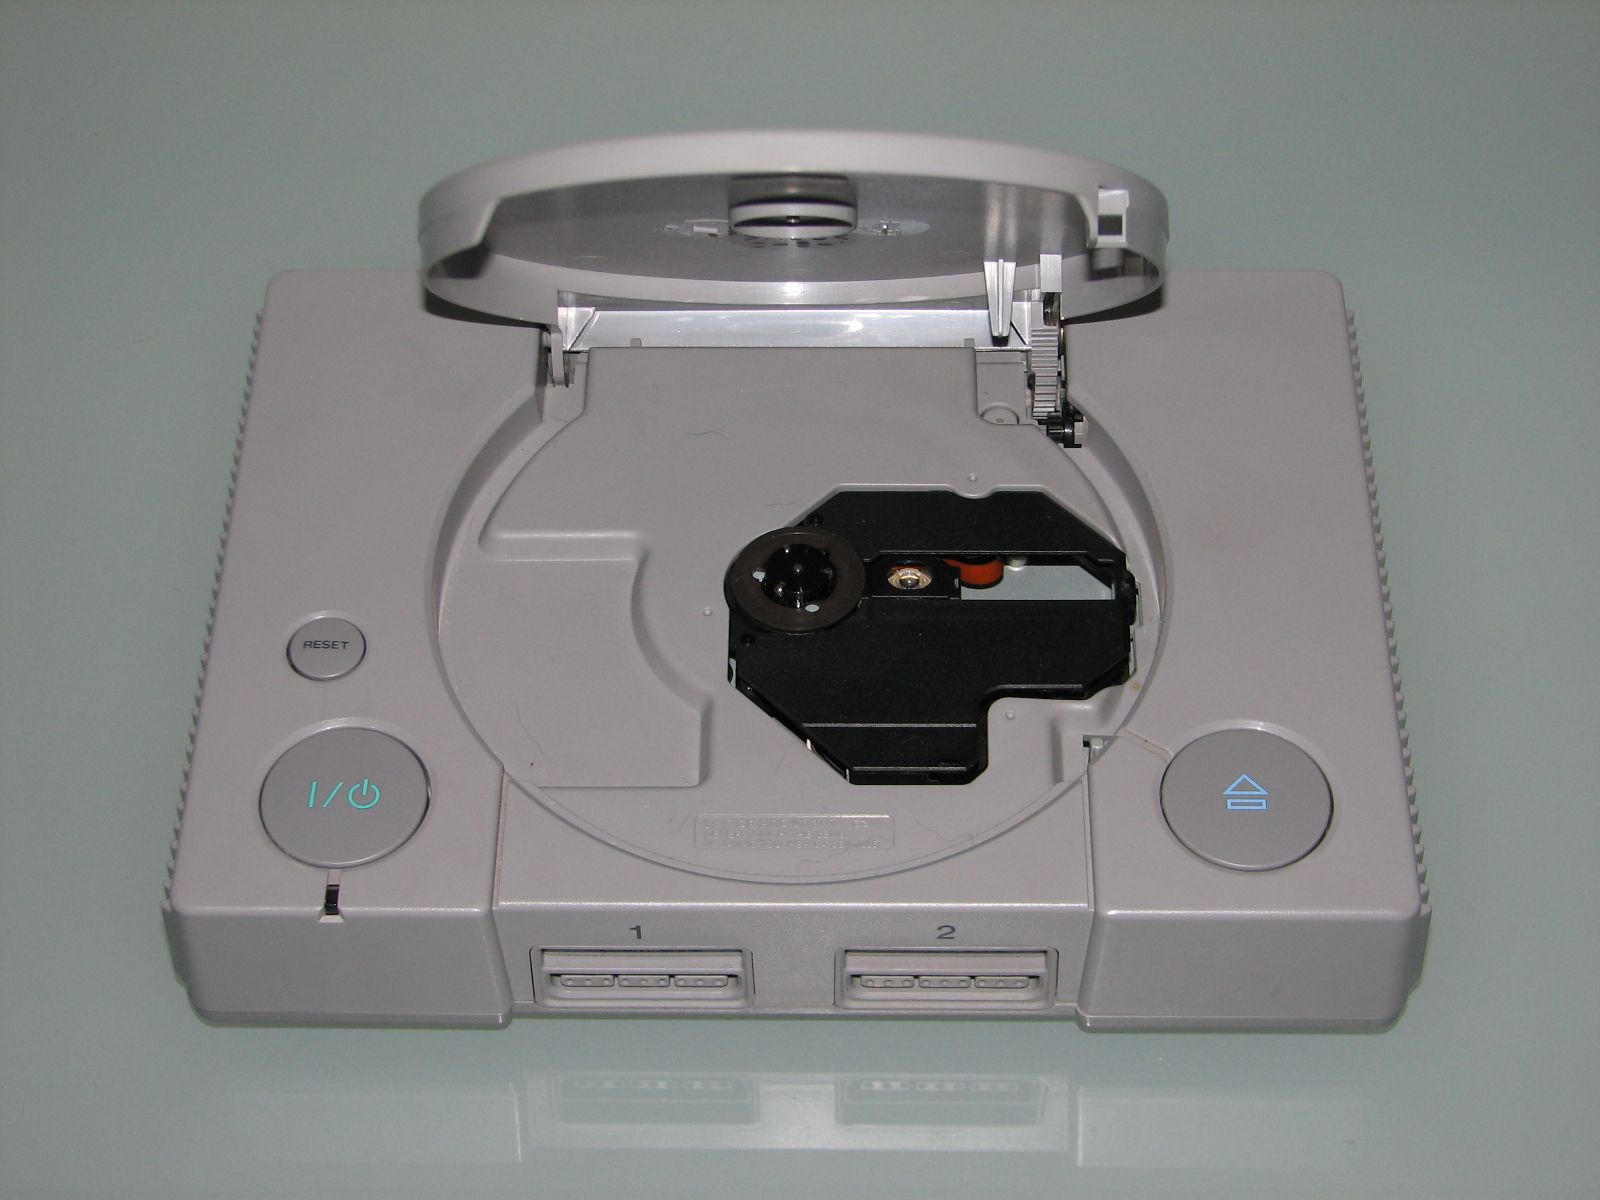 sony-playstation-scph-7502-ps1-pal-02-open.JPG